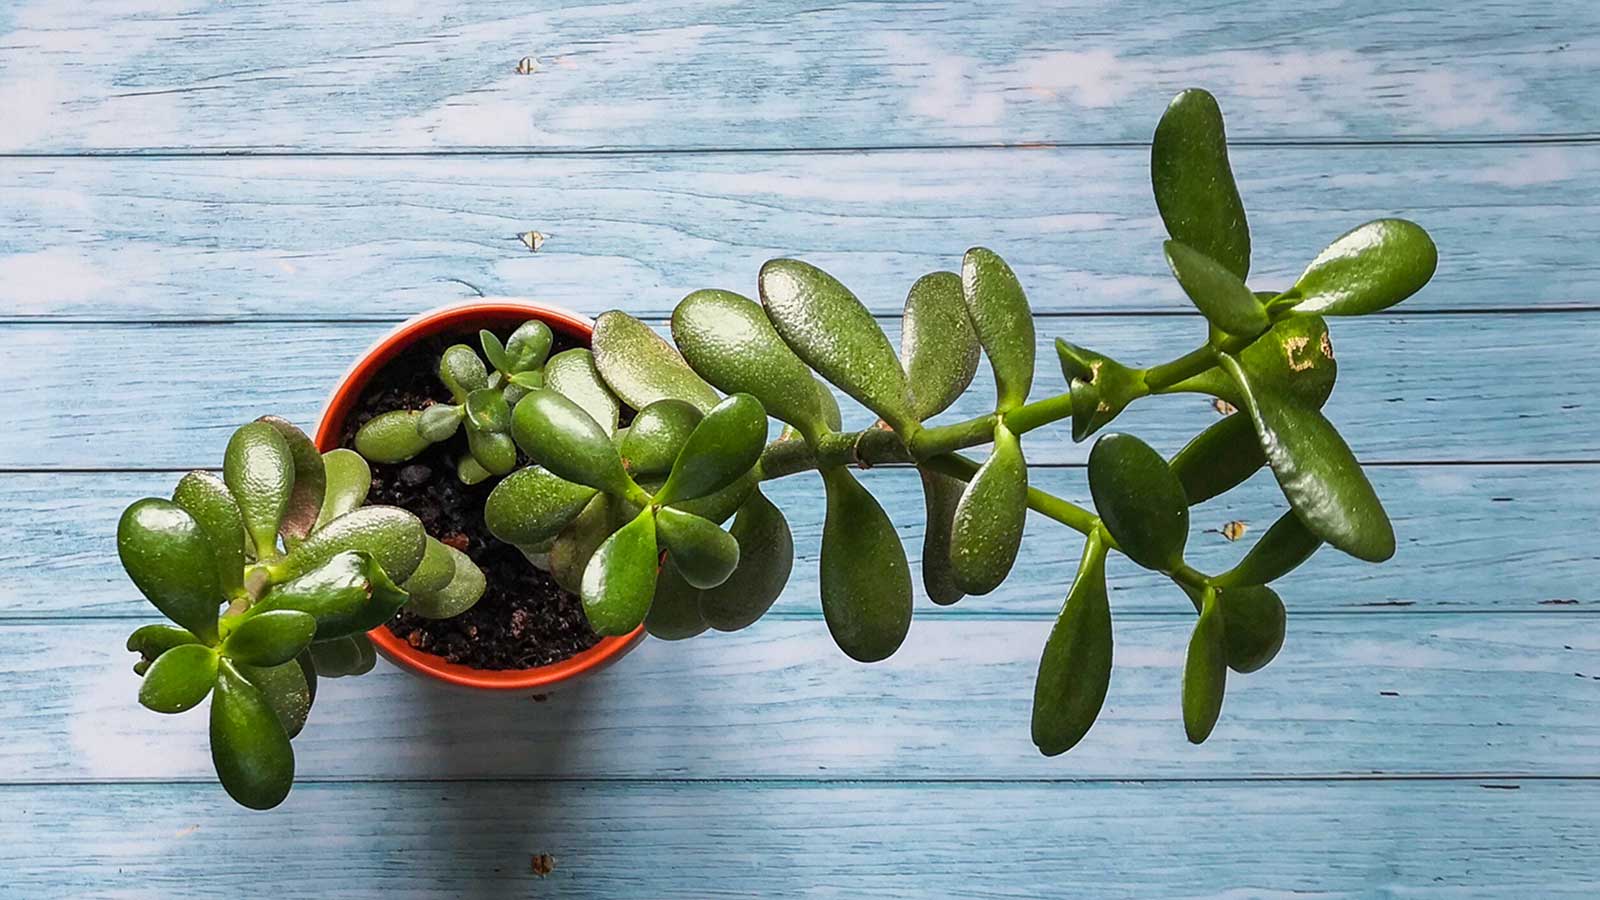 How to propagate jade plants: for new houseplants